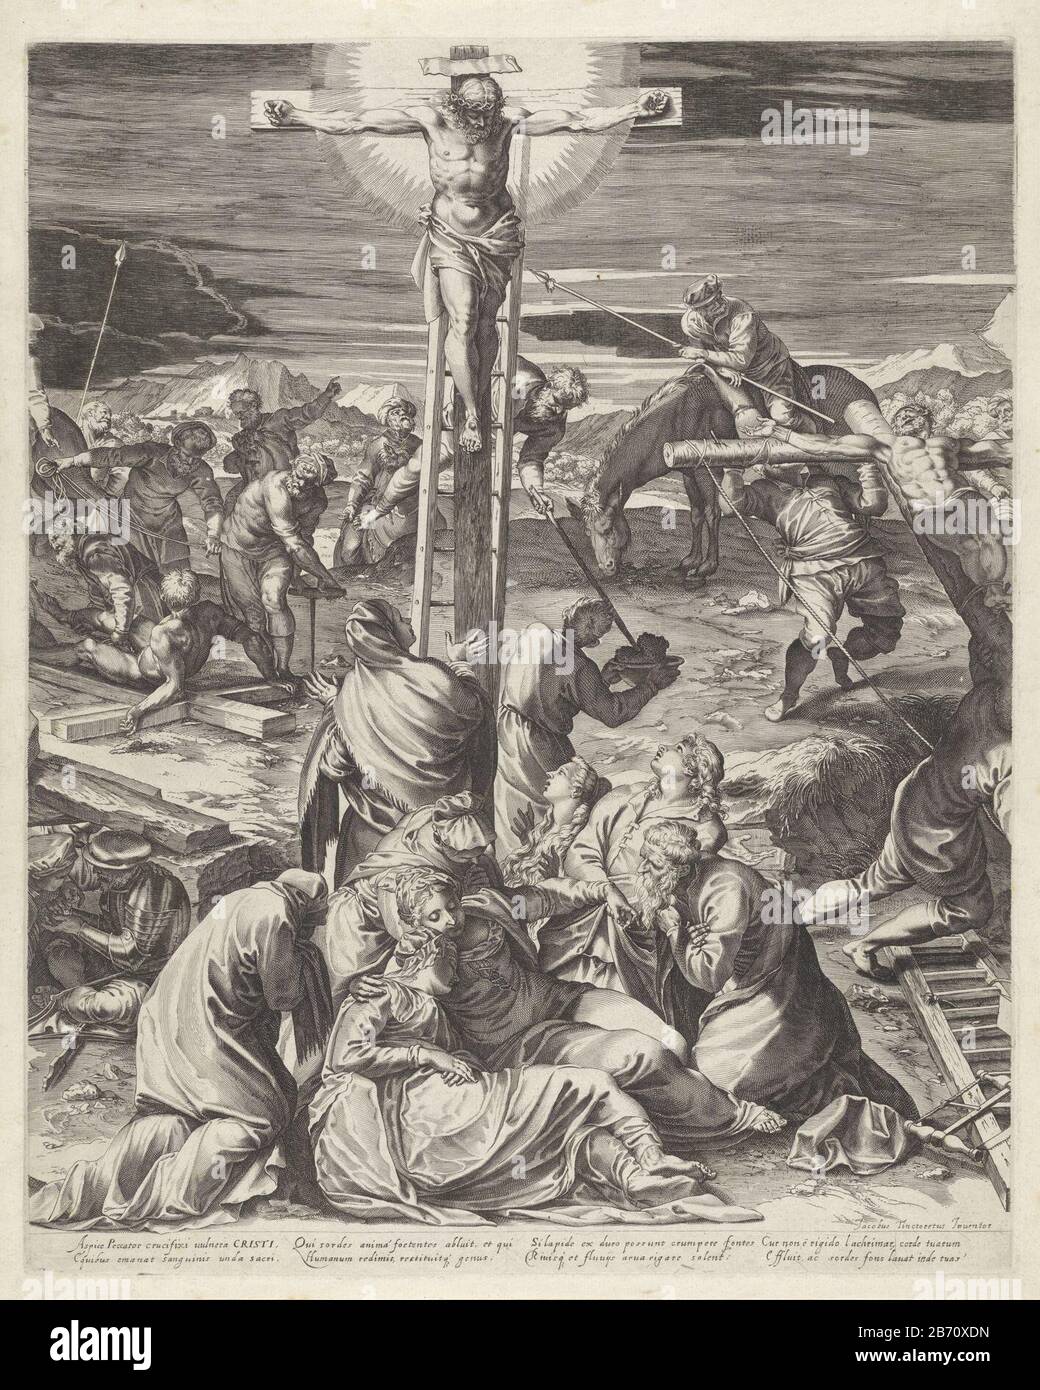 Kruisiging van Christus (middendeel) Crucifixion of Christ on Calvary. Christ hanging on the cross, left and right, the two criminals crucified him. Longinus is about to stabbing his lance into Christ's side. A group of men on horses and donkeys watching. The Mary and John grieve under the cross. Text in Latin in ondermarge. Manufacturer : printmaker: Aegidius Sadelernaar picture of: Agostino Carraccinaar painting by Jacopo Tintoretto (listed building) Publisher: Marcus SadelerPlaats manufacture: to print from Italy to painting: Venice Date: on or after 1582 Physical features: engra material: Stock Photo